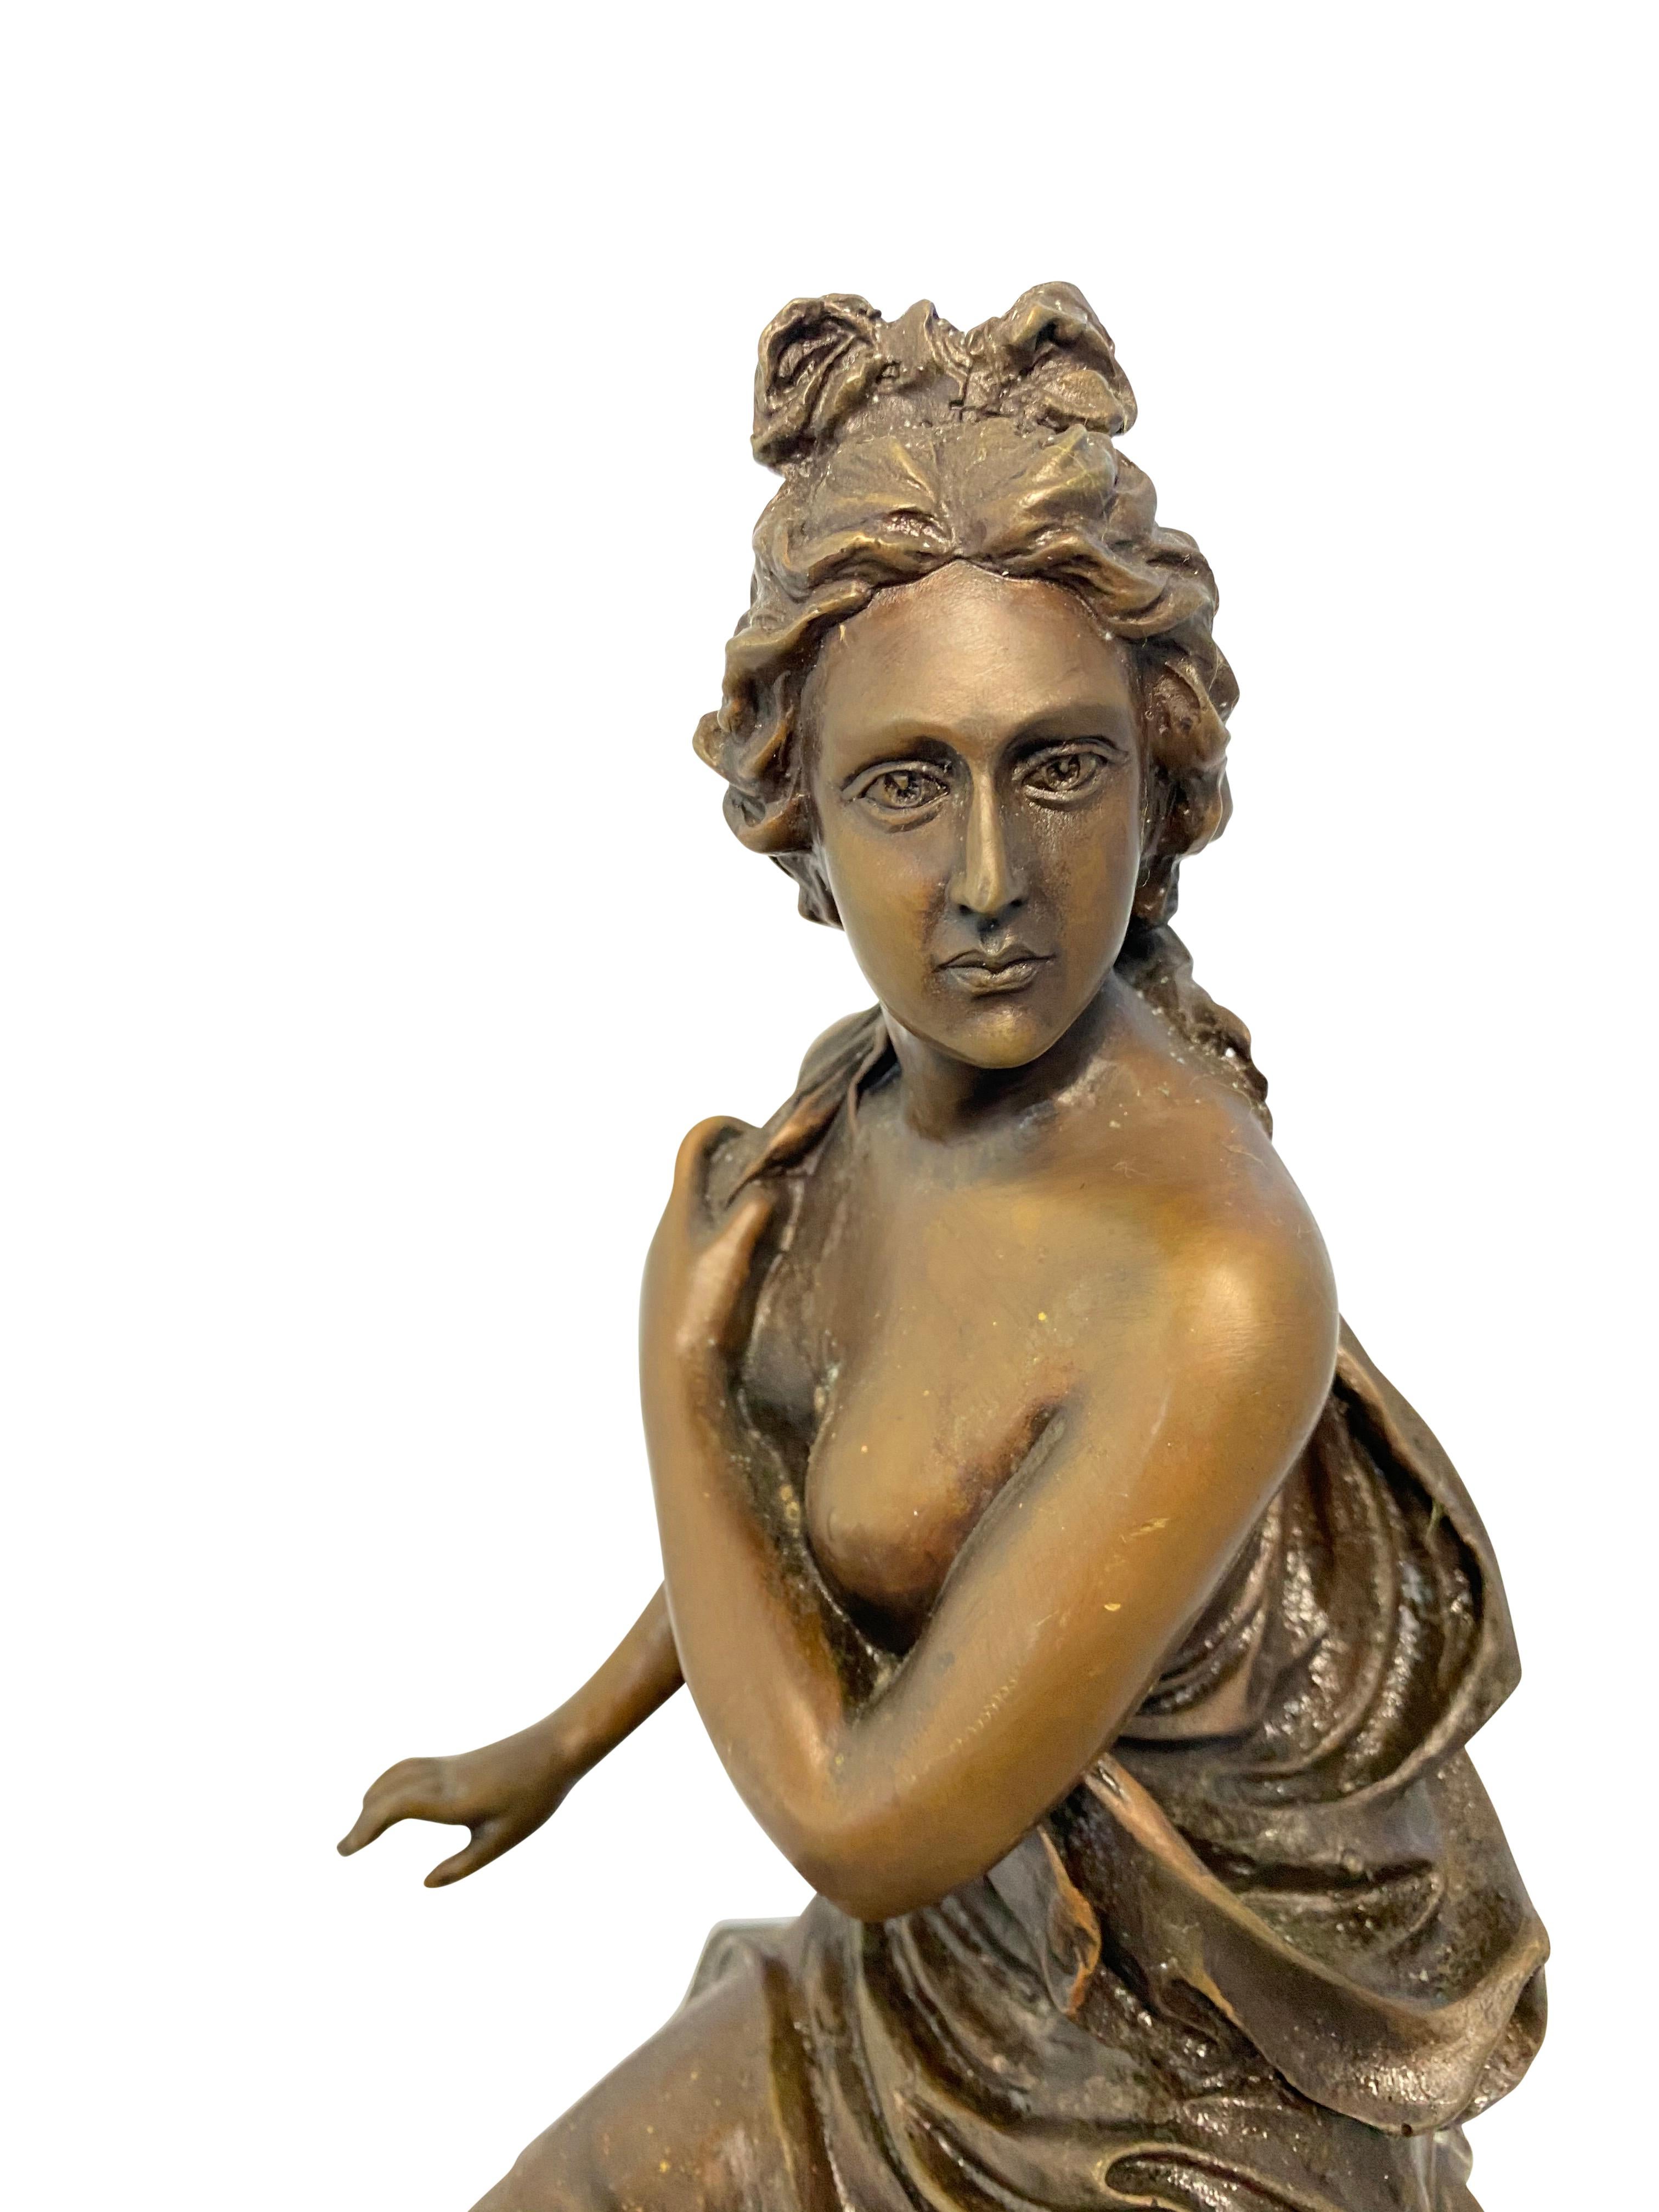 A neoclassical style bronze lady on detailed plinth base, 20th century. The styled sculpture of a striking, semi-nude woman on an exotic plinth. The lady features idealized Greek proportions and a dynamic energy. Excellent decoration for the